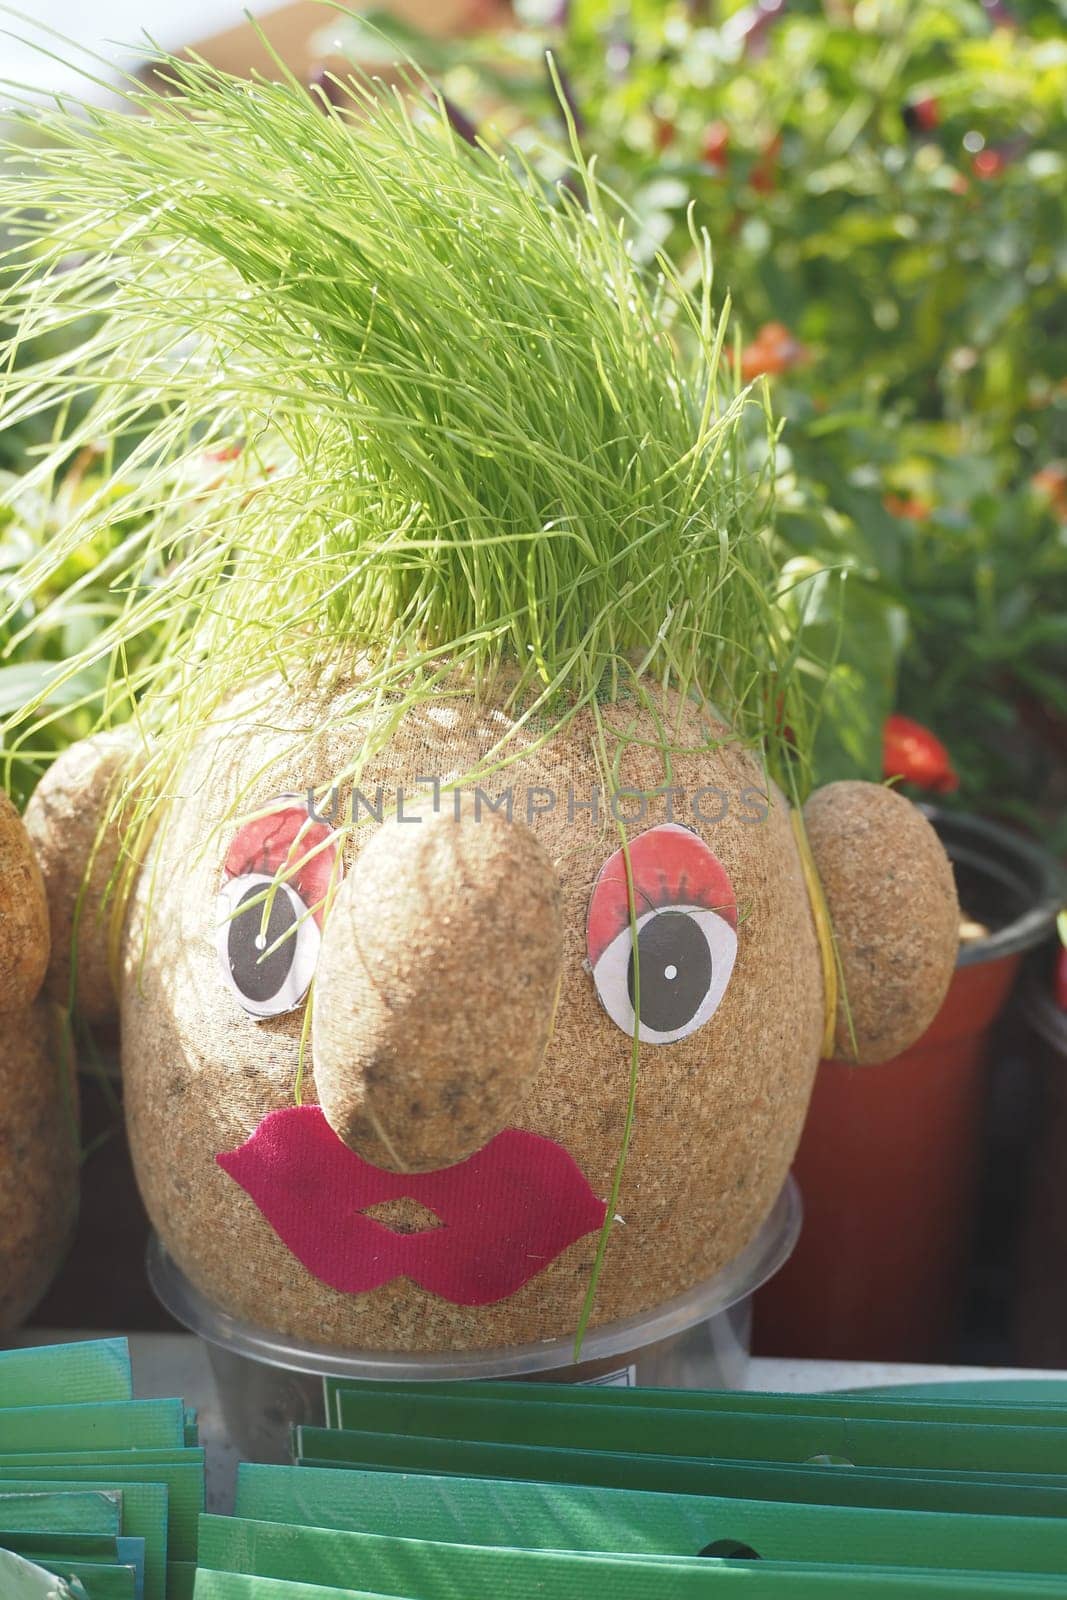 Handmade doll for growing grass seeds as hairs. Child education.